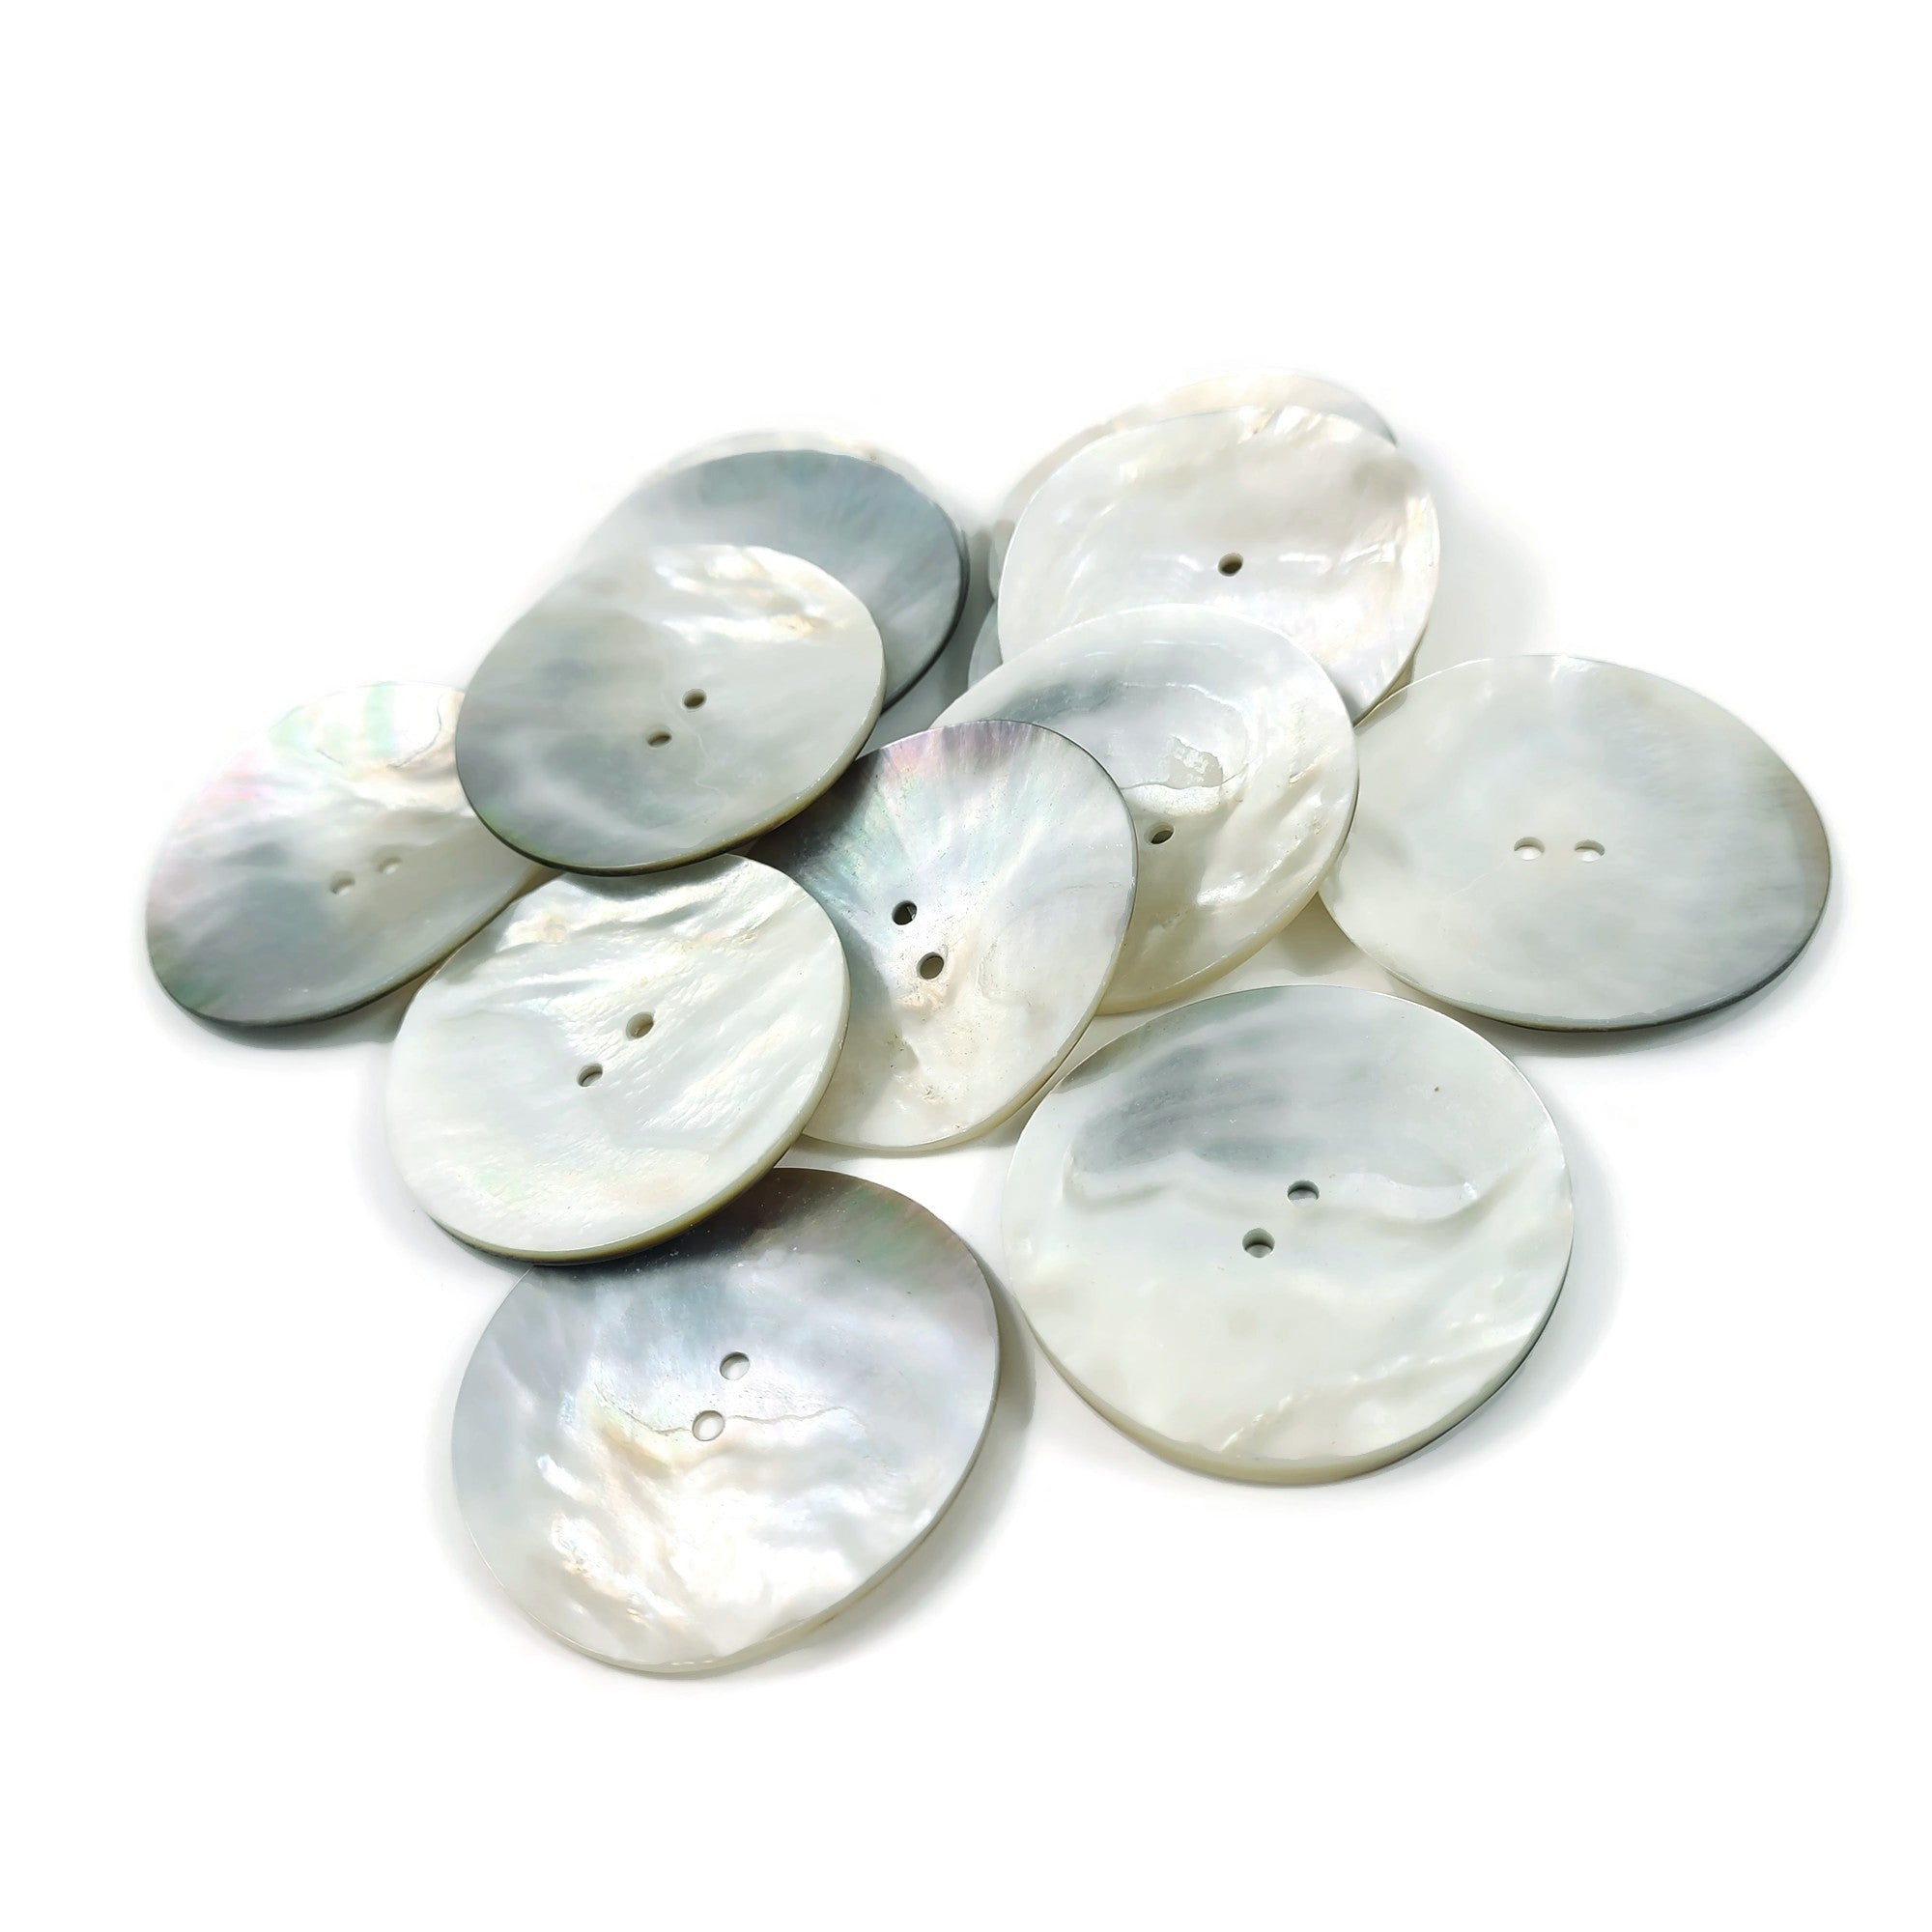 100pcs/bag 5-10mm White Sewing Pearl Buttons With Claw Flatback Half Round  Pearl Crafts Diy Jewel Buttons Accessorie For Sewing